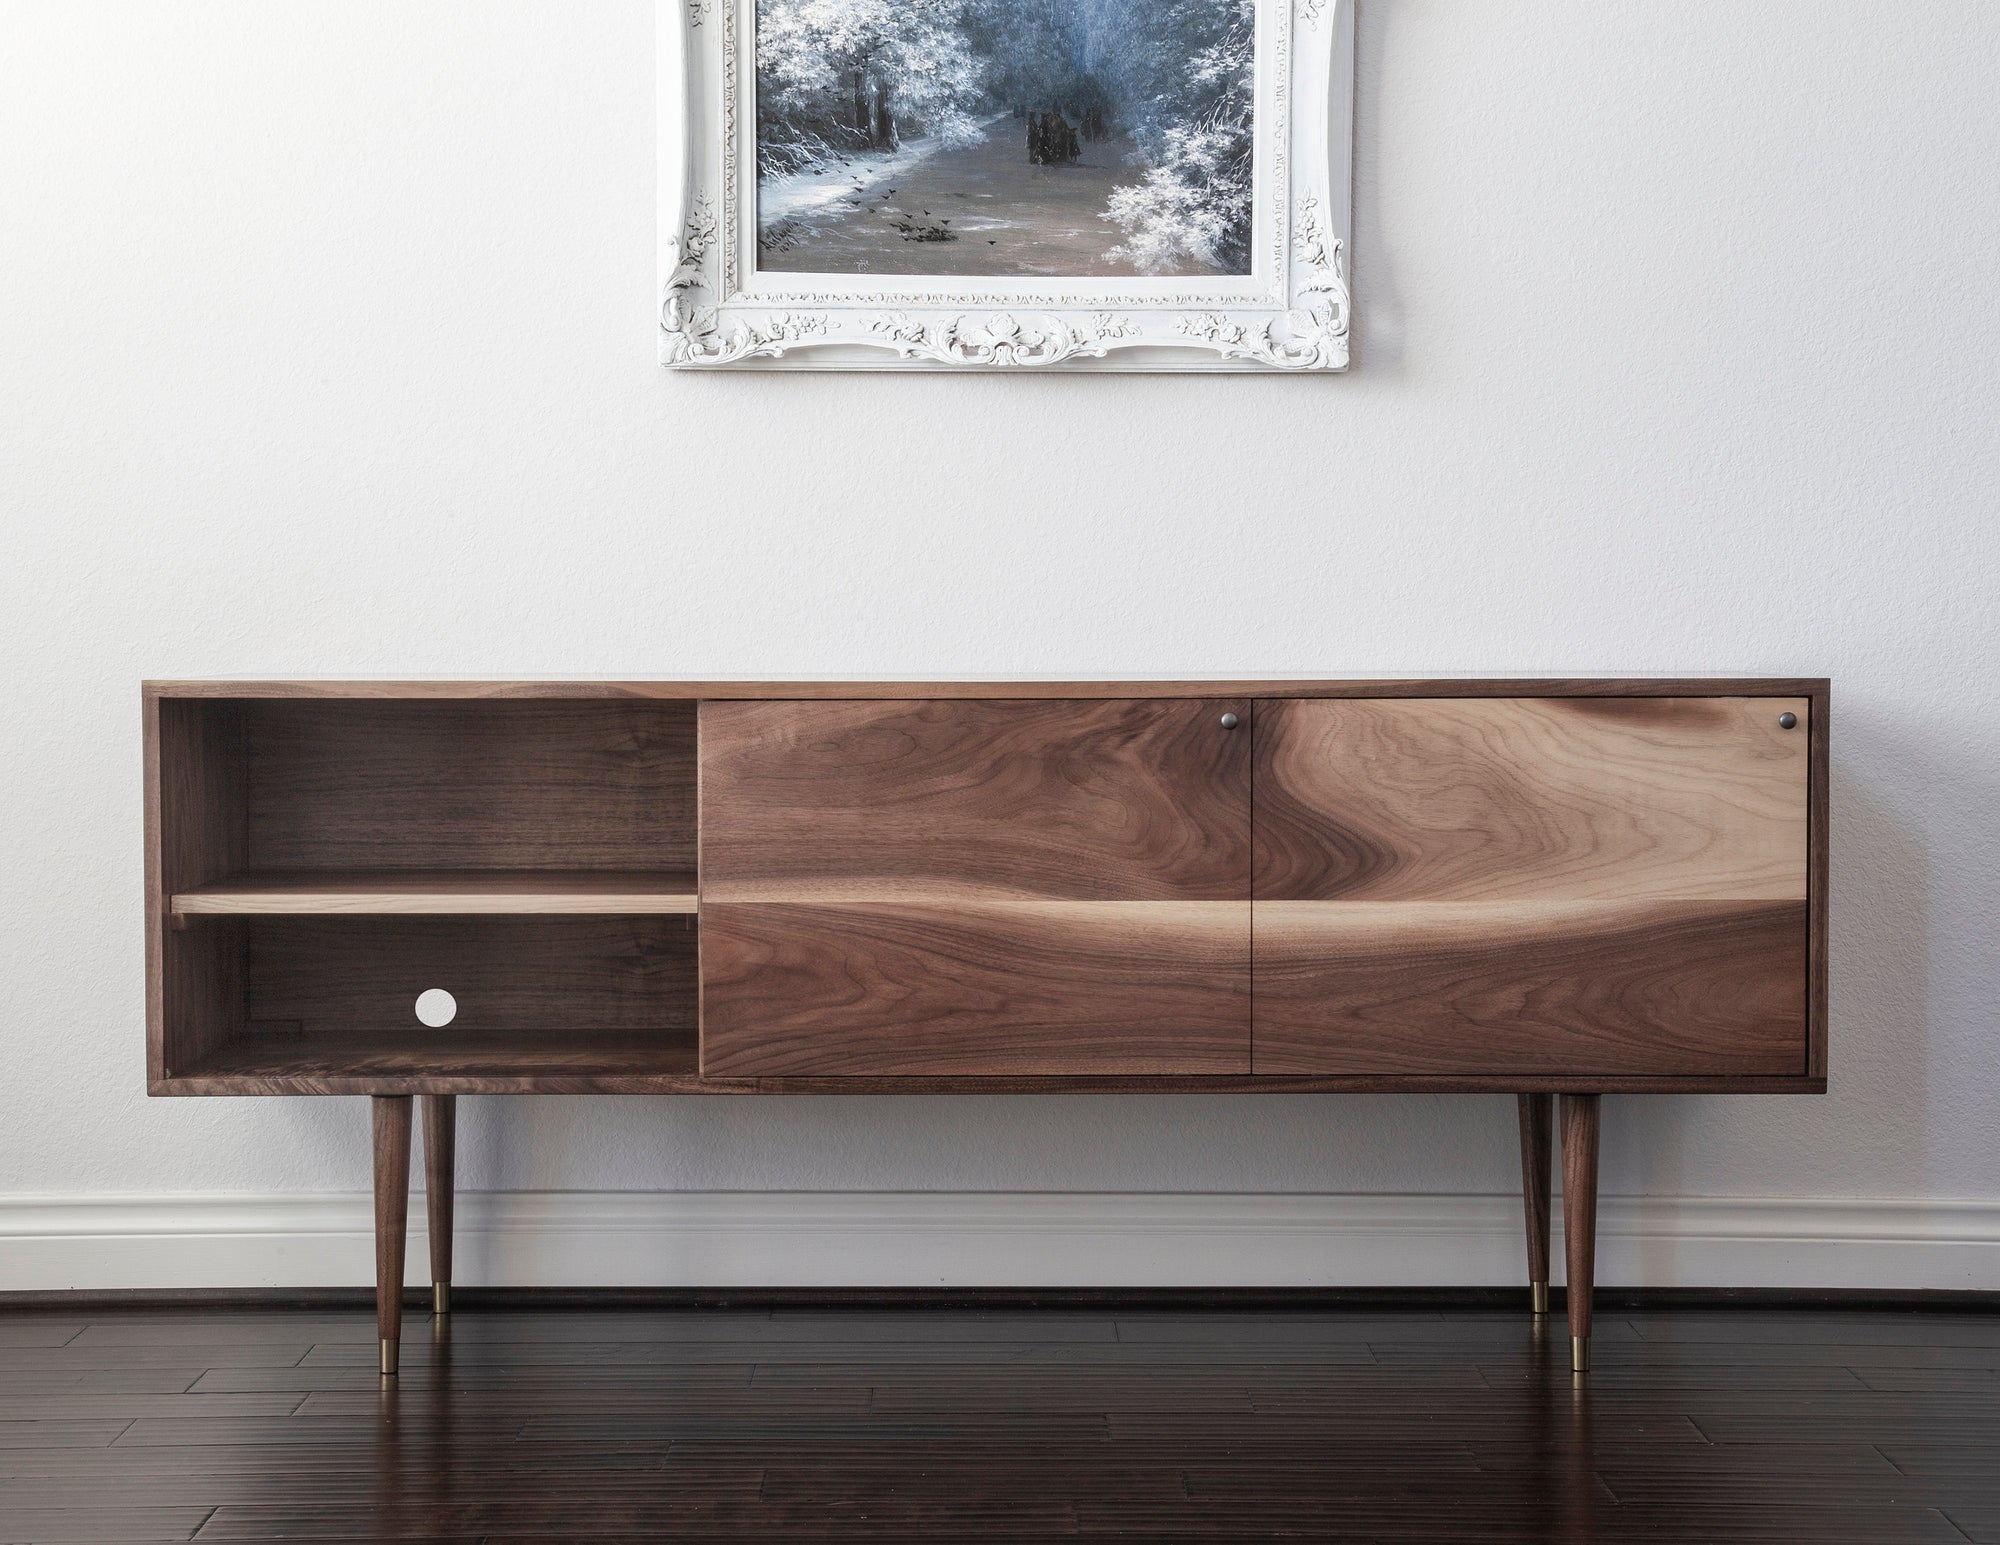 This Mid Century Credenza is the ideal addition to any home. Crafted from solid walnut, it adds a unique touch of sophistication to any décor. It's the perfect media console, TV stand, or vinyl storage cabinet for any living space, making it an ideal housewarming gift. Bring timelessness and style to any room with this beautiful piece of furniture.